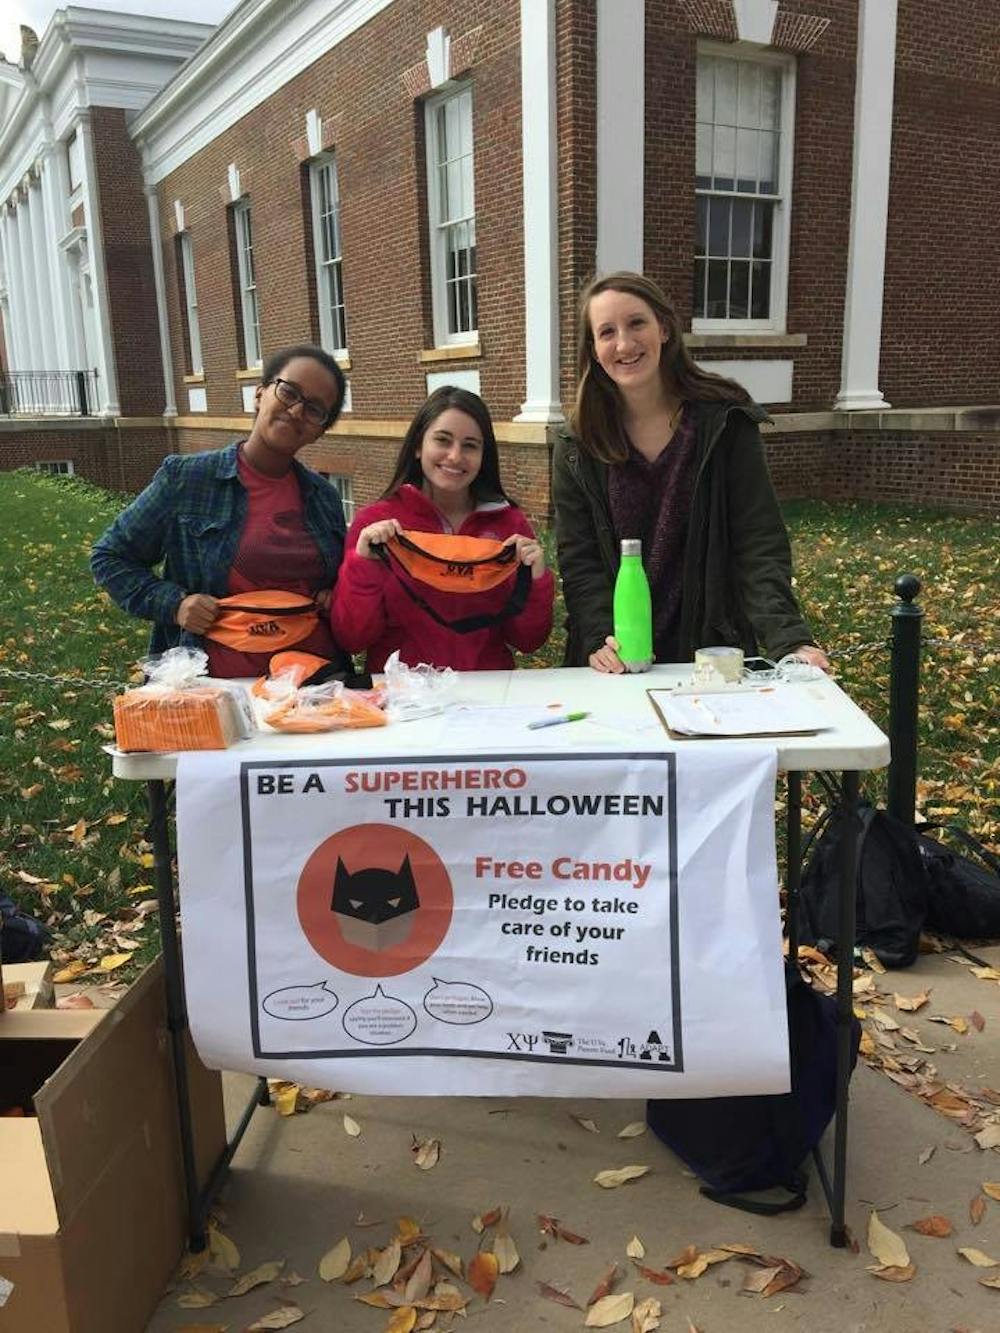 <p>ADAPT, in combination with other University organizations,&nbsp;will put on alternative celebratory events, safety reminders, free giveaways and a Halloween safety pledge students can sign, committing themselves to being active bystanders and taking extra care to look out for their friends this holiday season.</p>